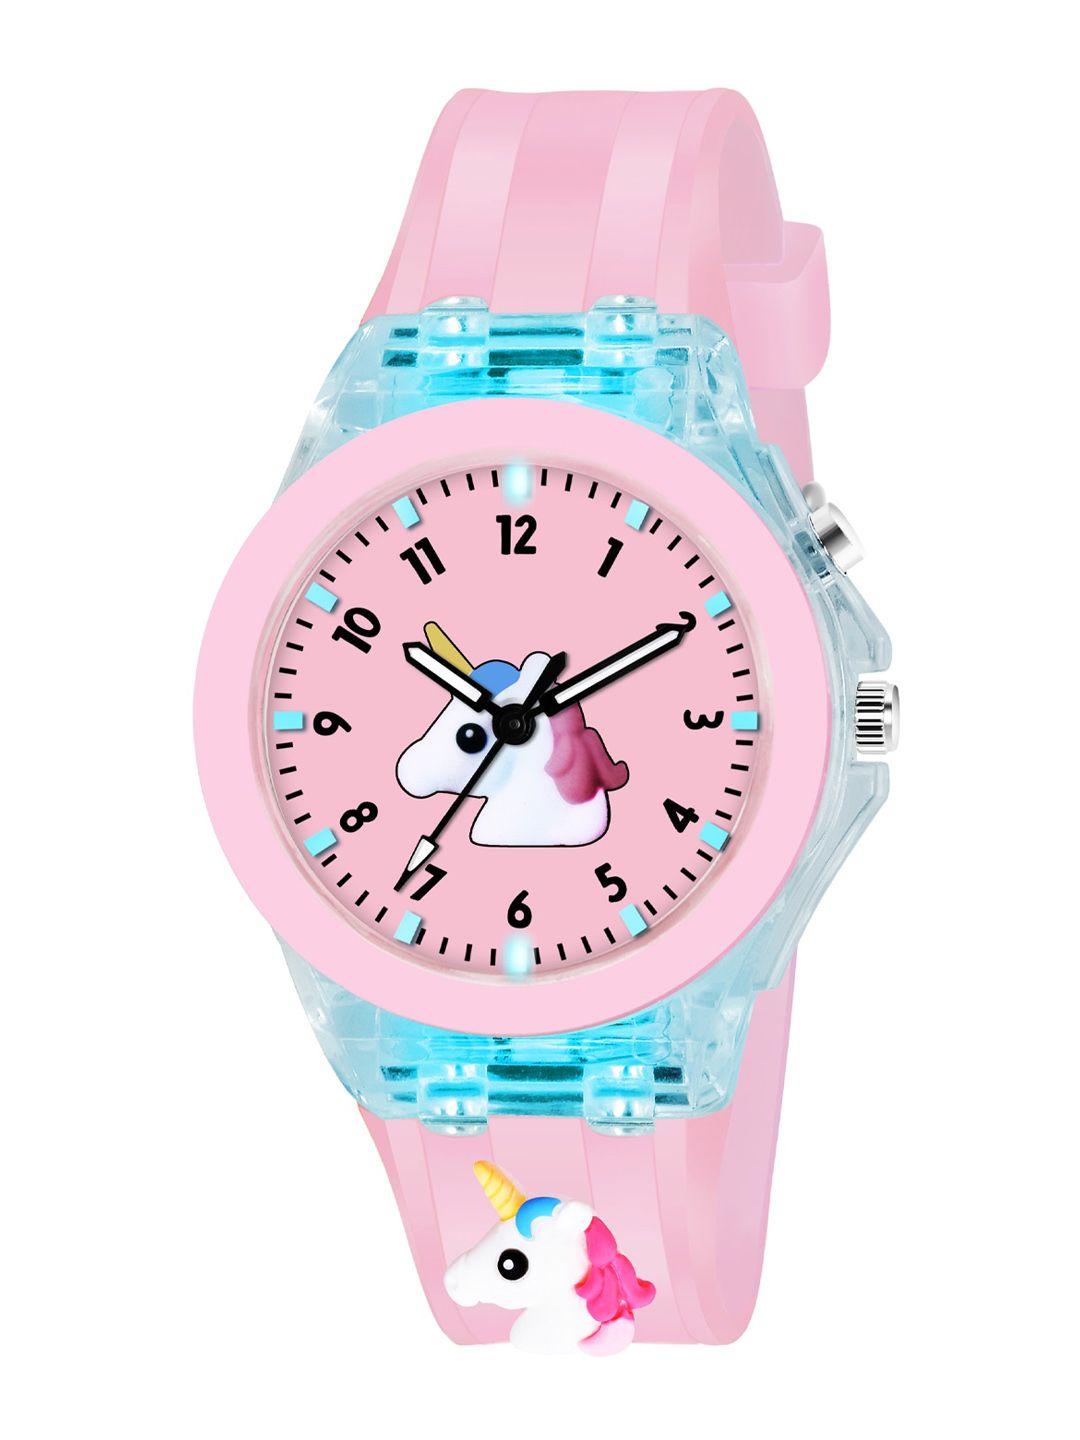 shocknshop printed dial & straps scratch resistant analogue watch led unicorn 327